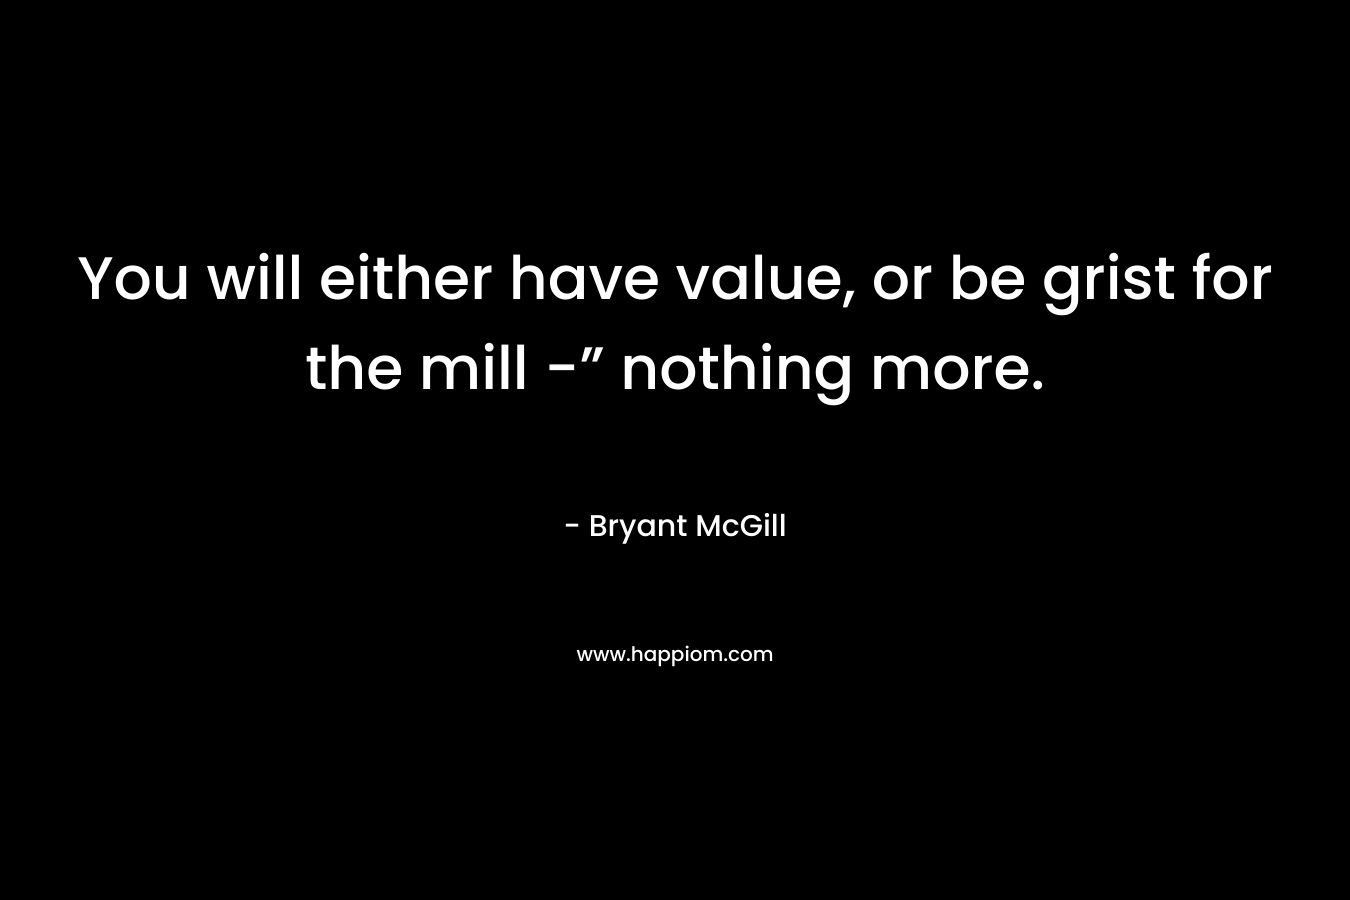 You will either have value, or be grist for the mill -” nothing more. – Bryant McGill